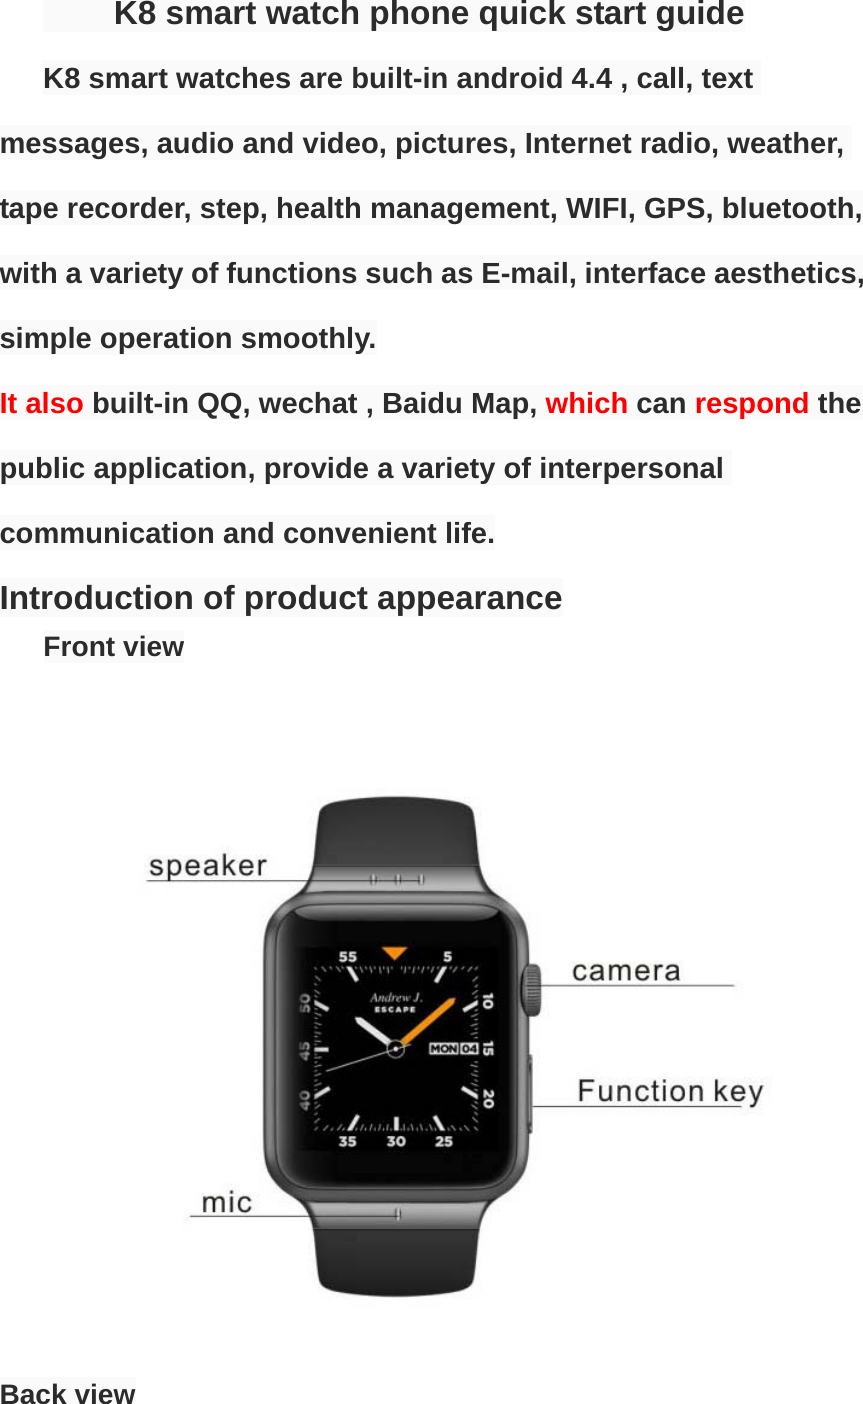      K8 smart watch phone quick start guide K8 smart watches are built-in android 4.4 , call, text messages, audio and video, pictures, Internet radio, weather, tape recorder, step, health management, WIFI, GPS, bluetooth, with a variety of functions such as E-mail, interface aesthetics, simple operation smoothly. It also built-in QQ, wechat , Baidu Map, which can respond the public application, provide a variety of interpersonal communication and convenient life. Introduction of product appearance      Front view                      Back view  